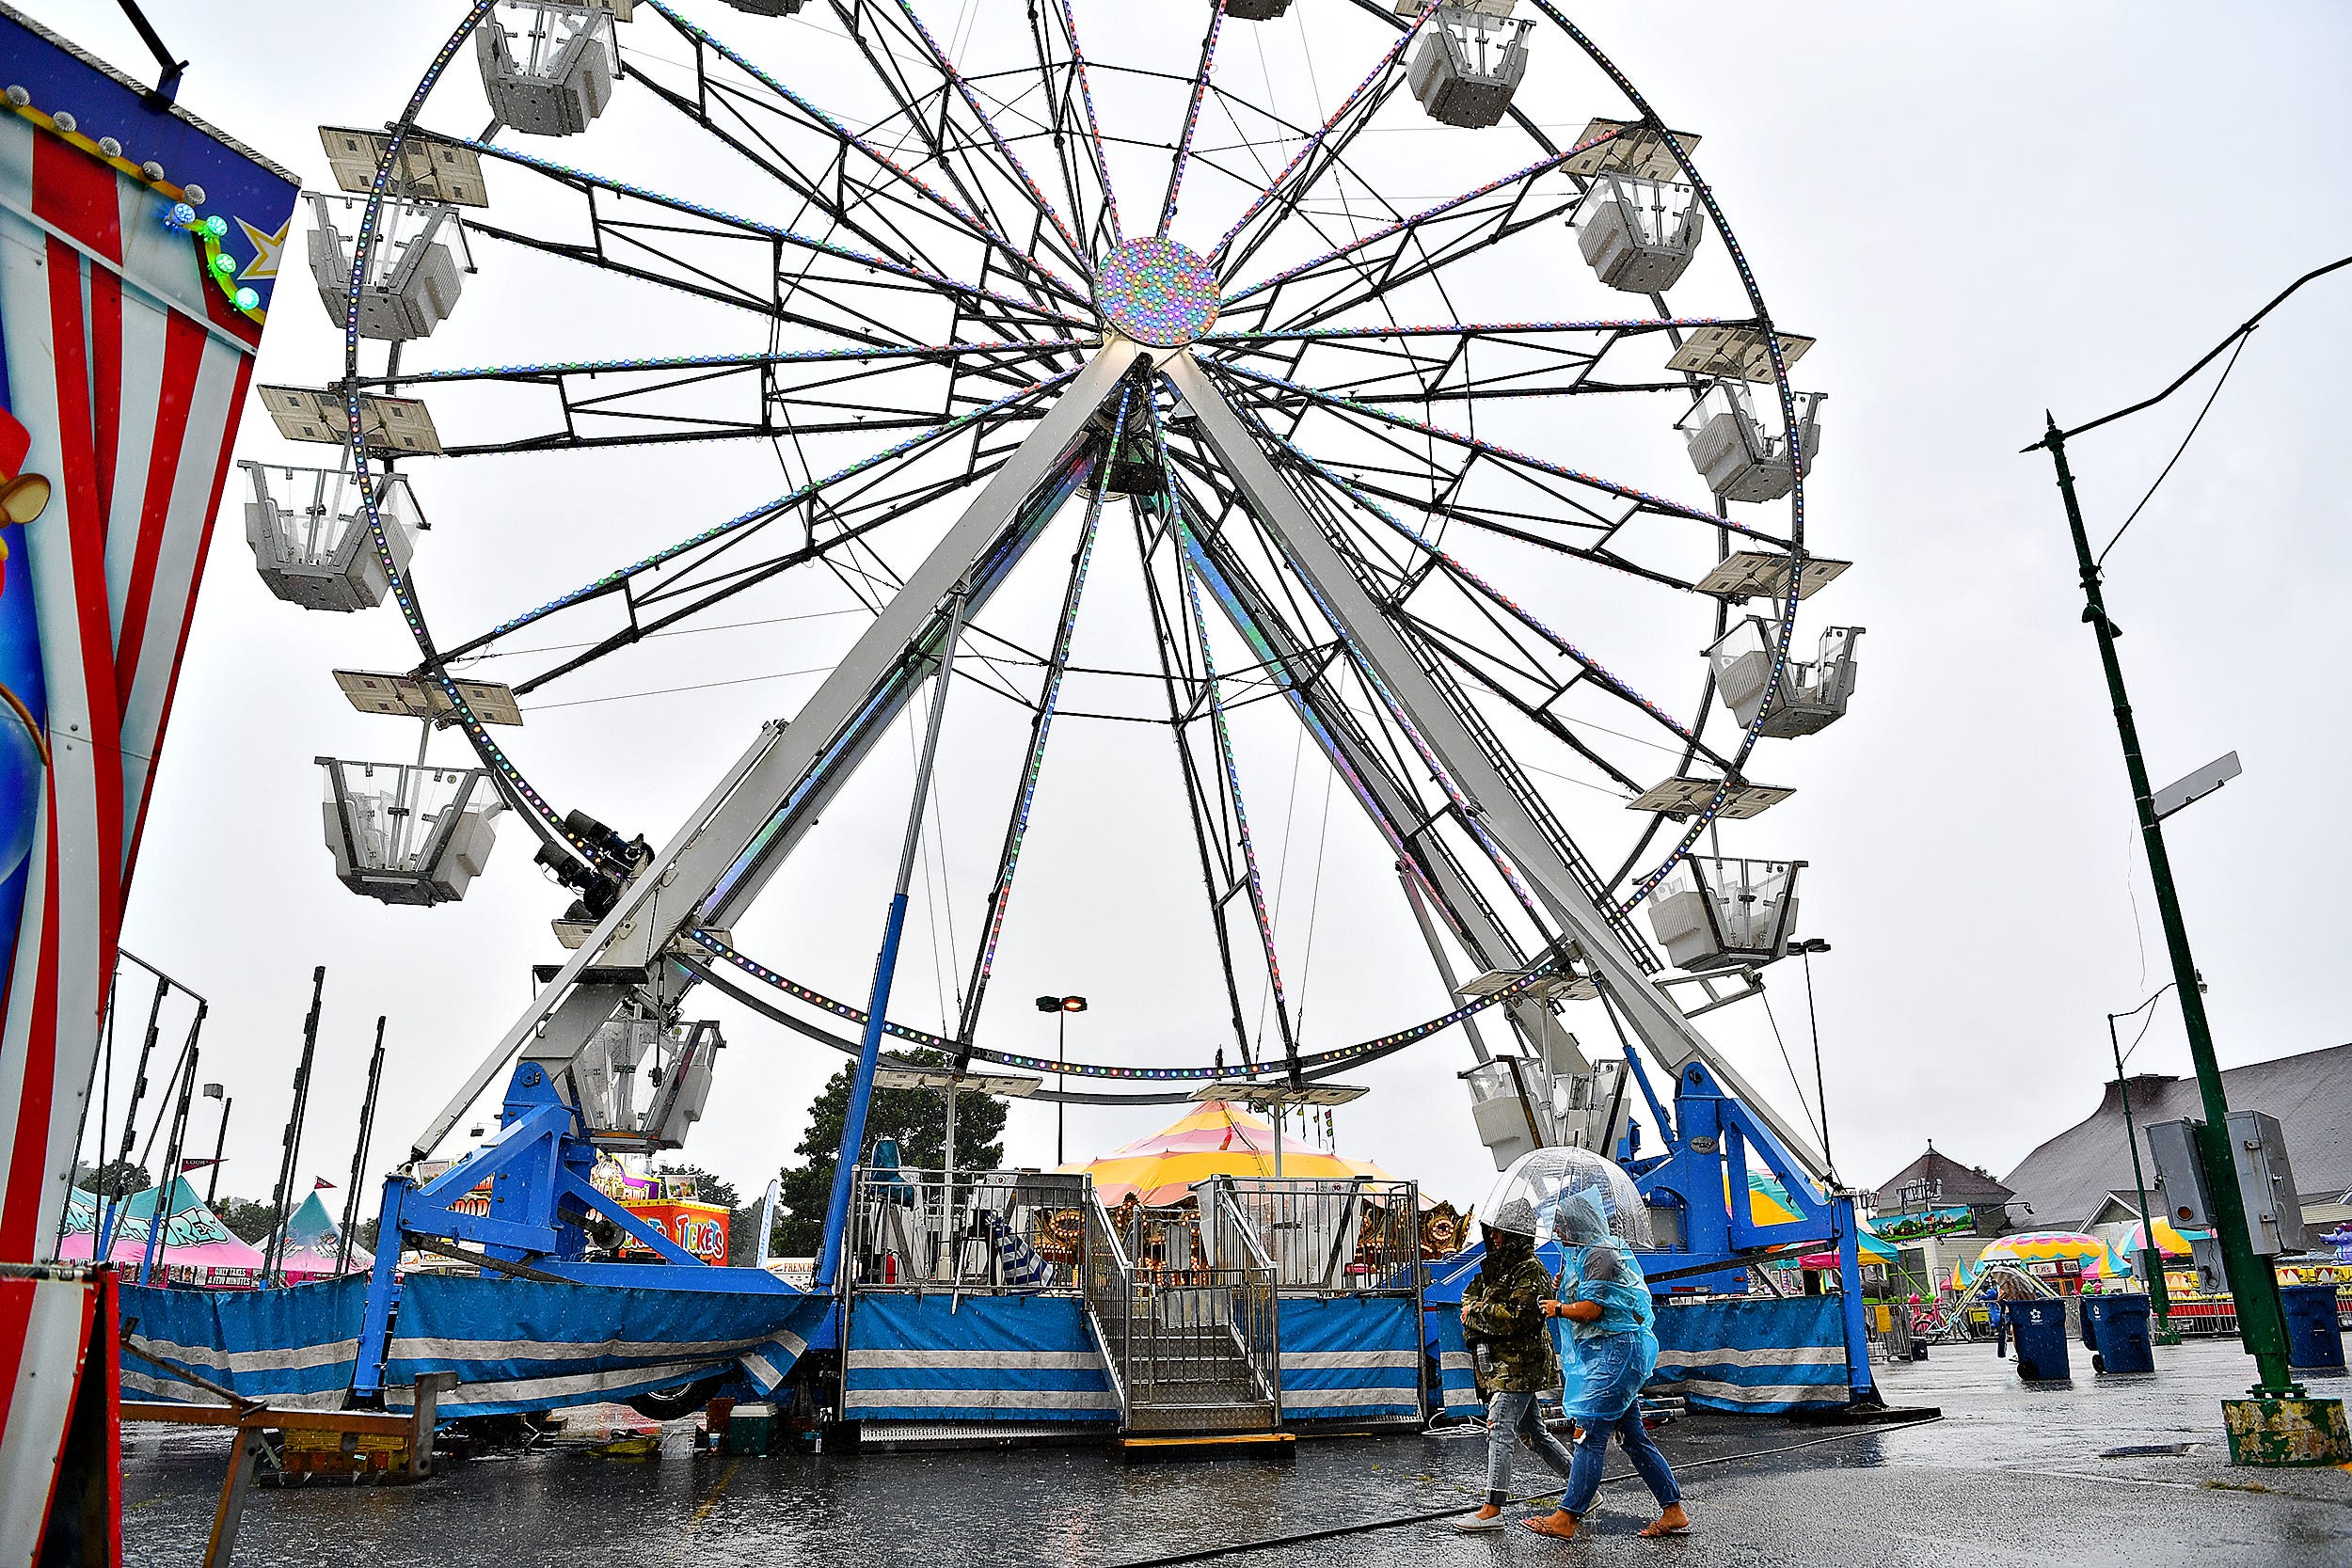 Patrons try to stay dry during the final day of York State Fair in York, Pa., Sunday, July 31, 2022. Dawn J. Sagert/The York Dispatch